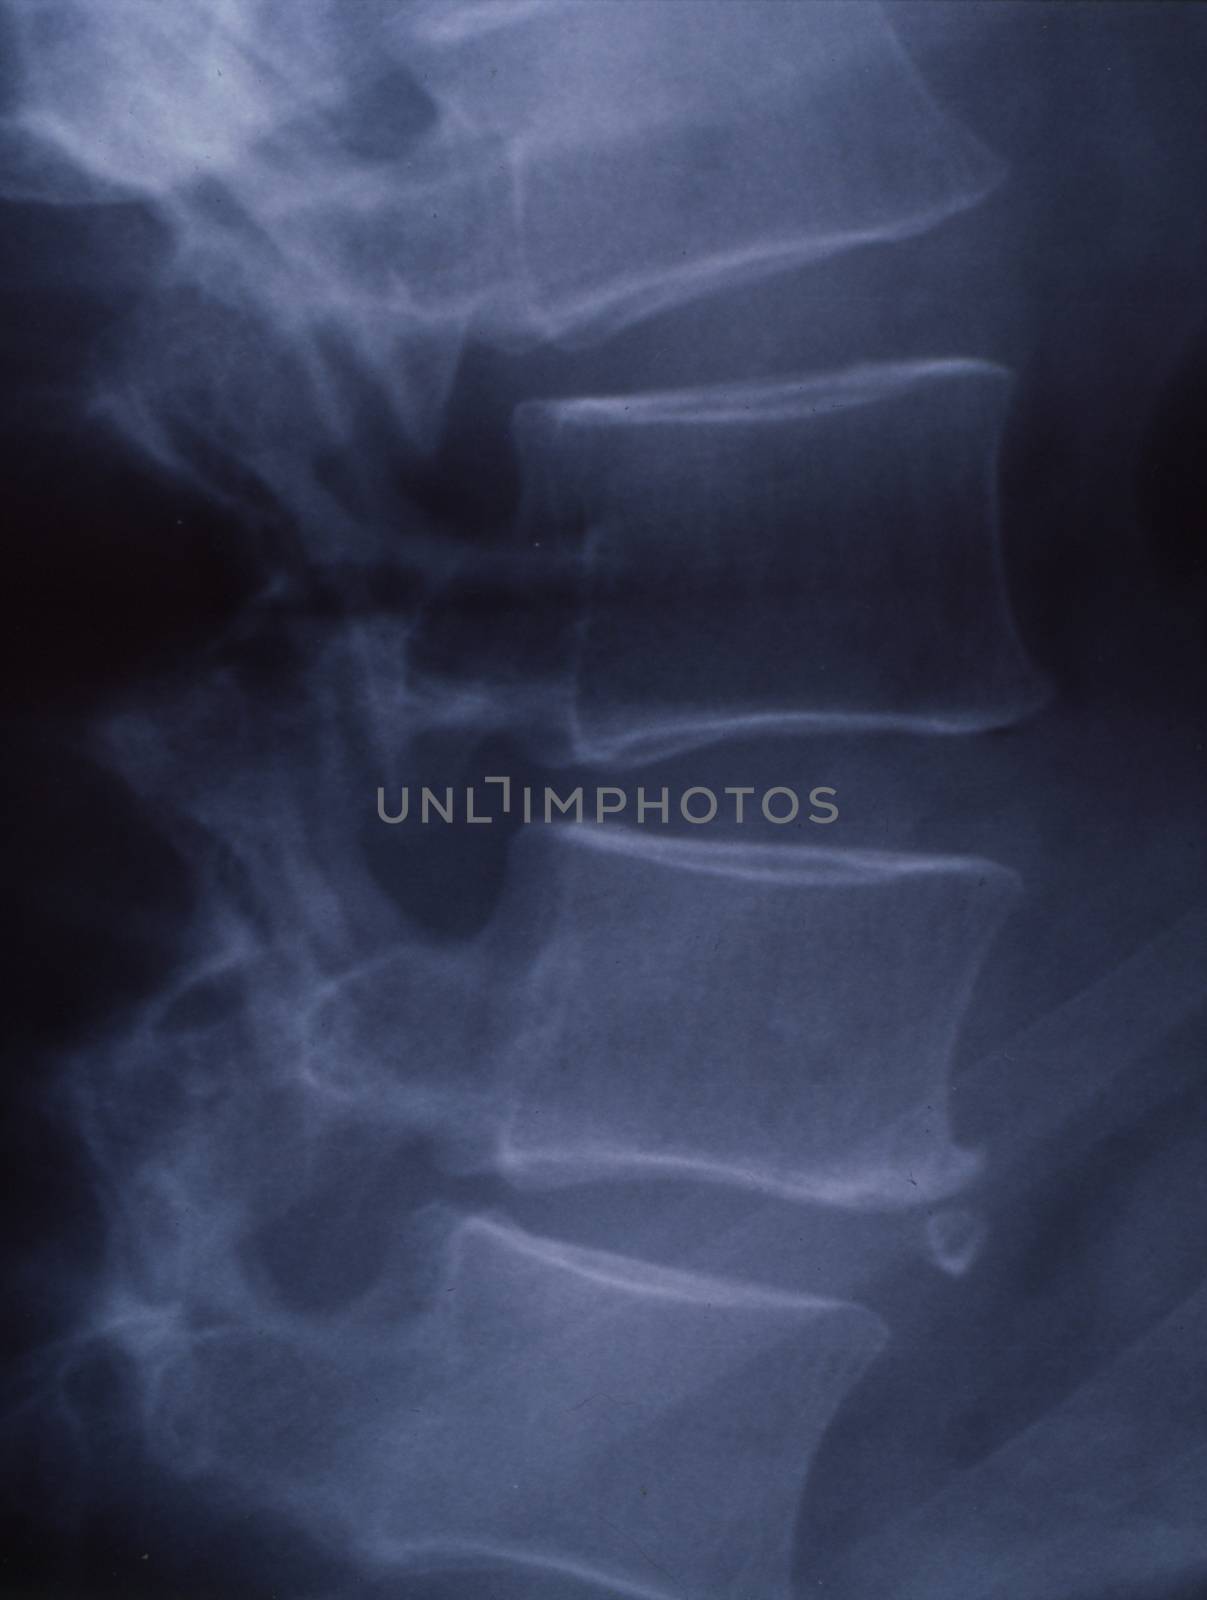 X-ray image of the spine for medical diagnosis